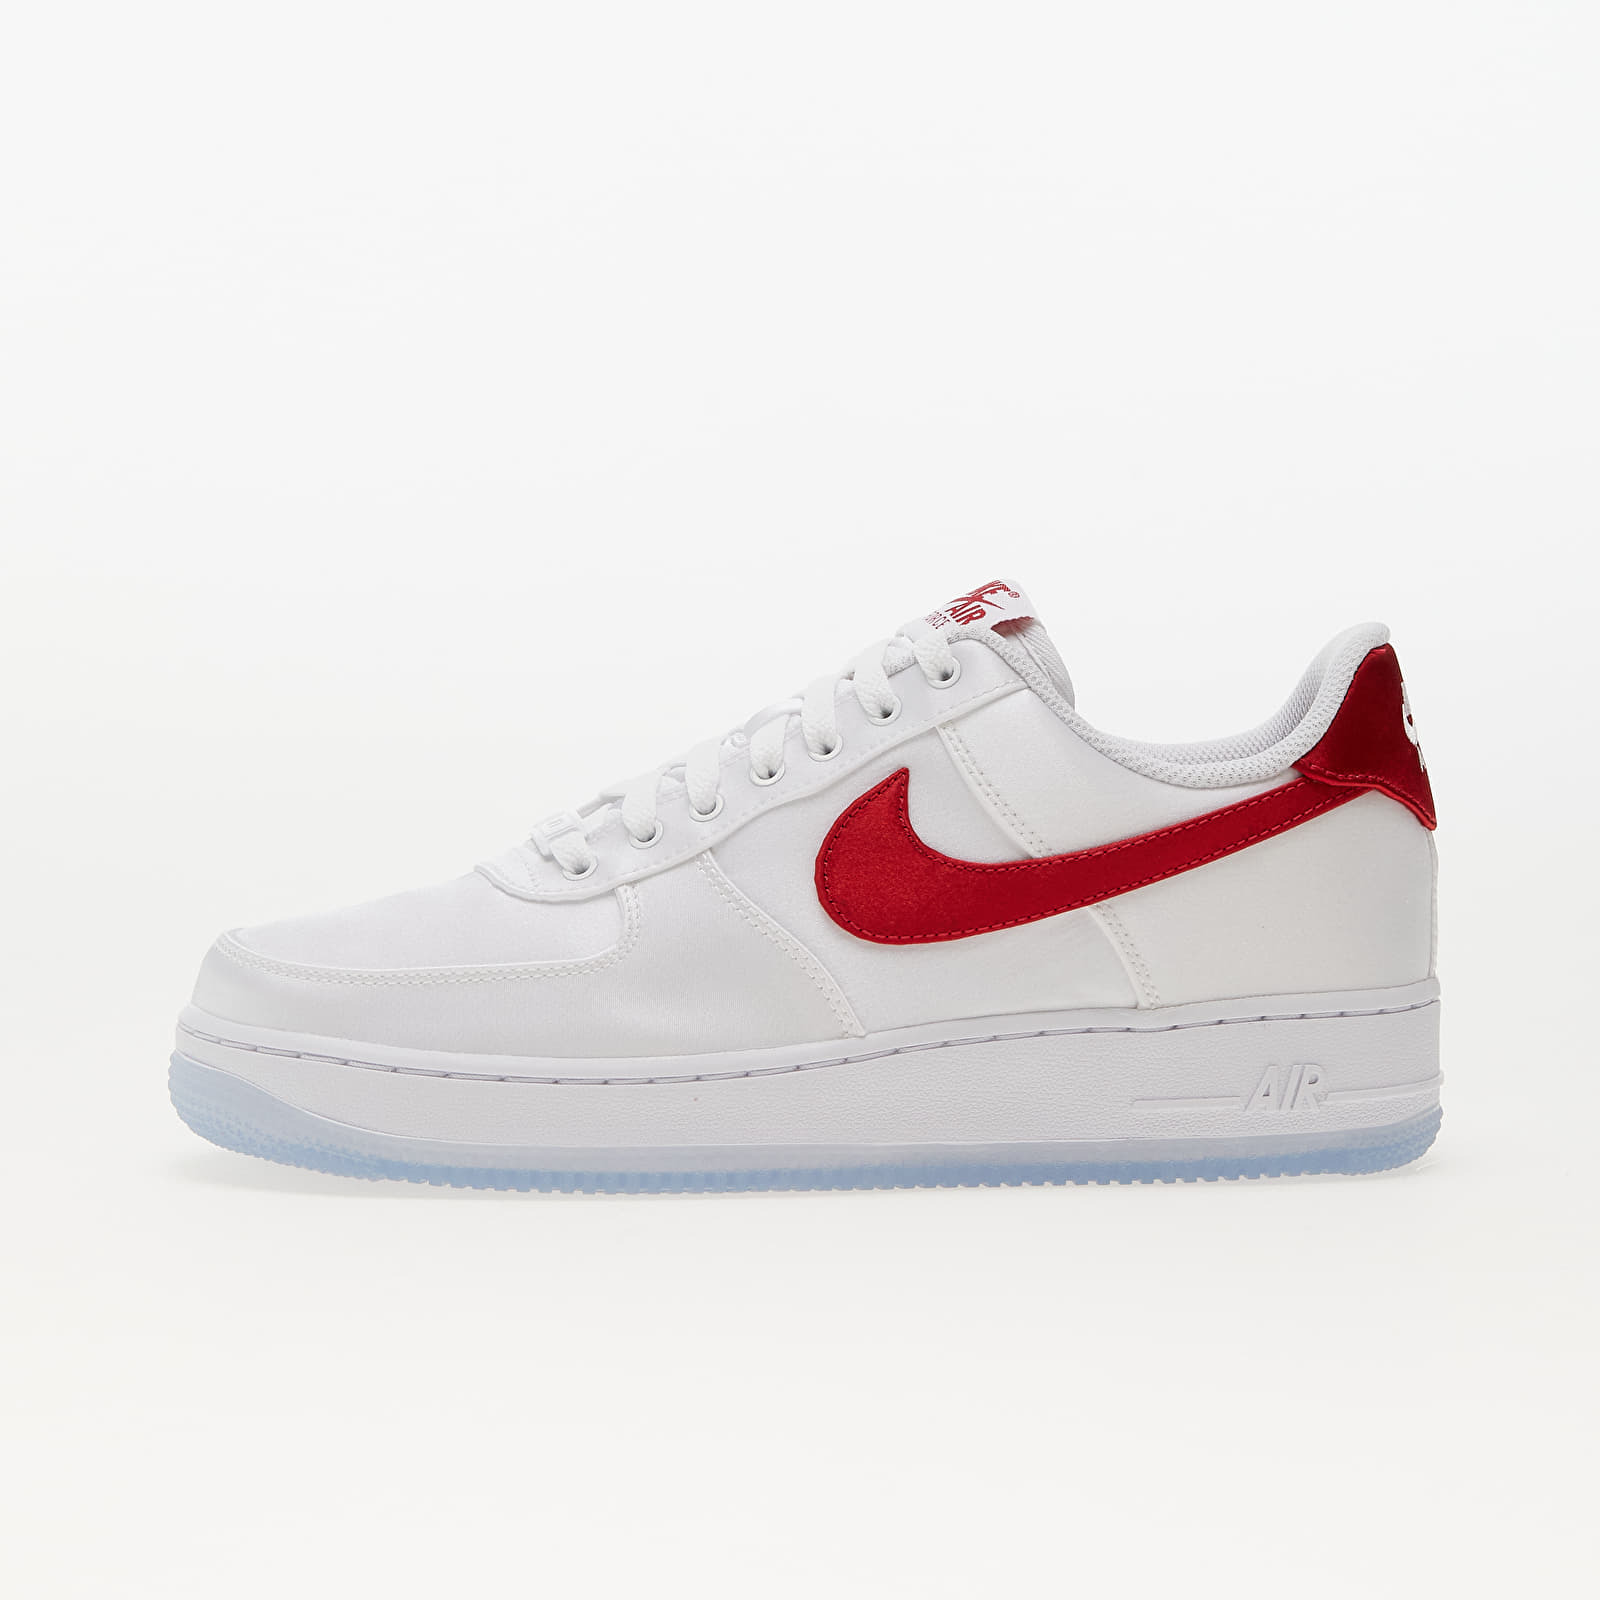 Levně Nike W Air Force 1 '07 Essential Snkr White/ Varsity Red